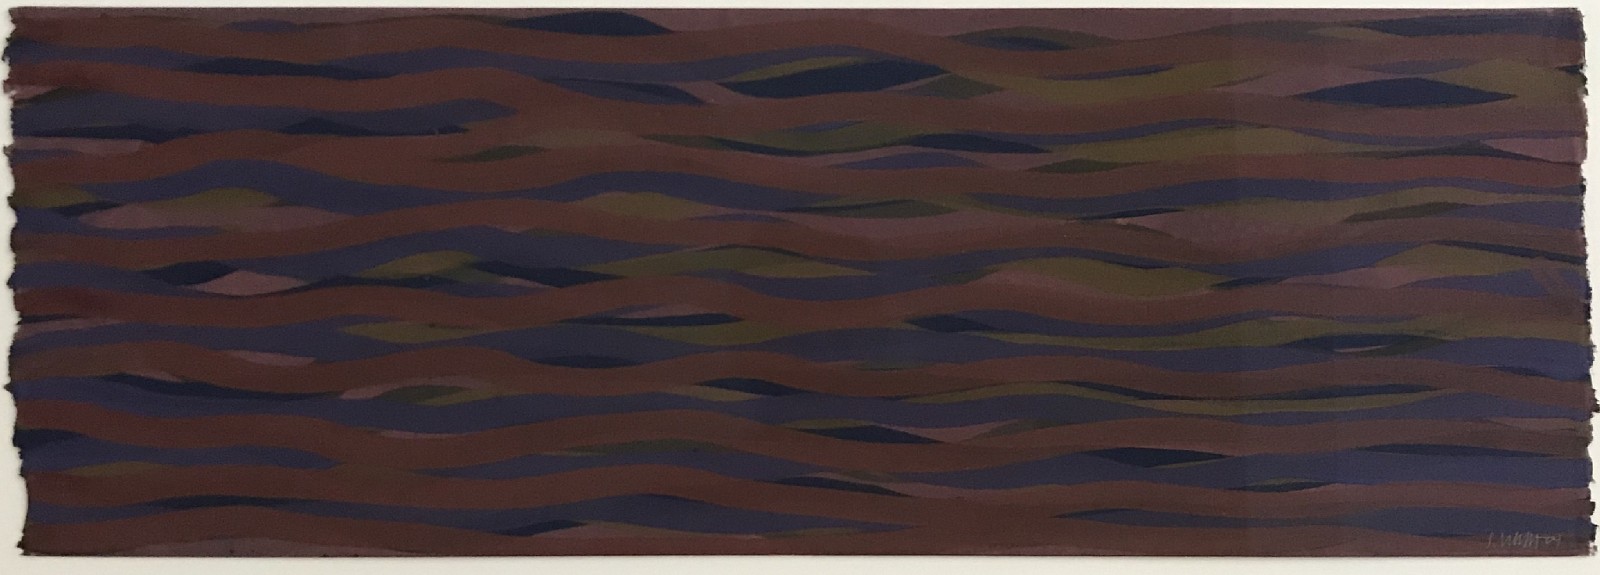 Sol LeWitt, Horizontal Wavy Lines, 2001
gouache  on paper, 8"" x 23""
signed S. Lewitt and dated 01, l.r.
JCA 6270
$26,000